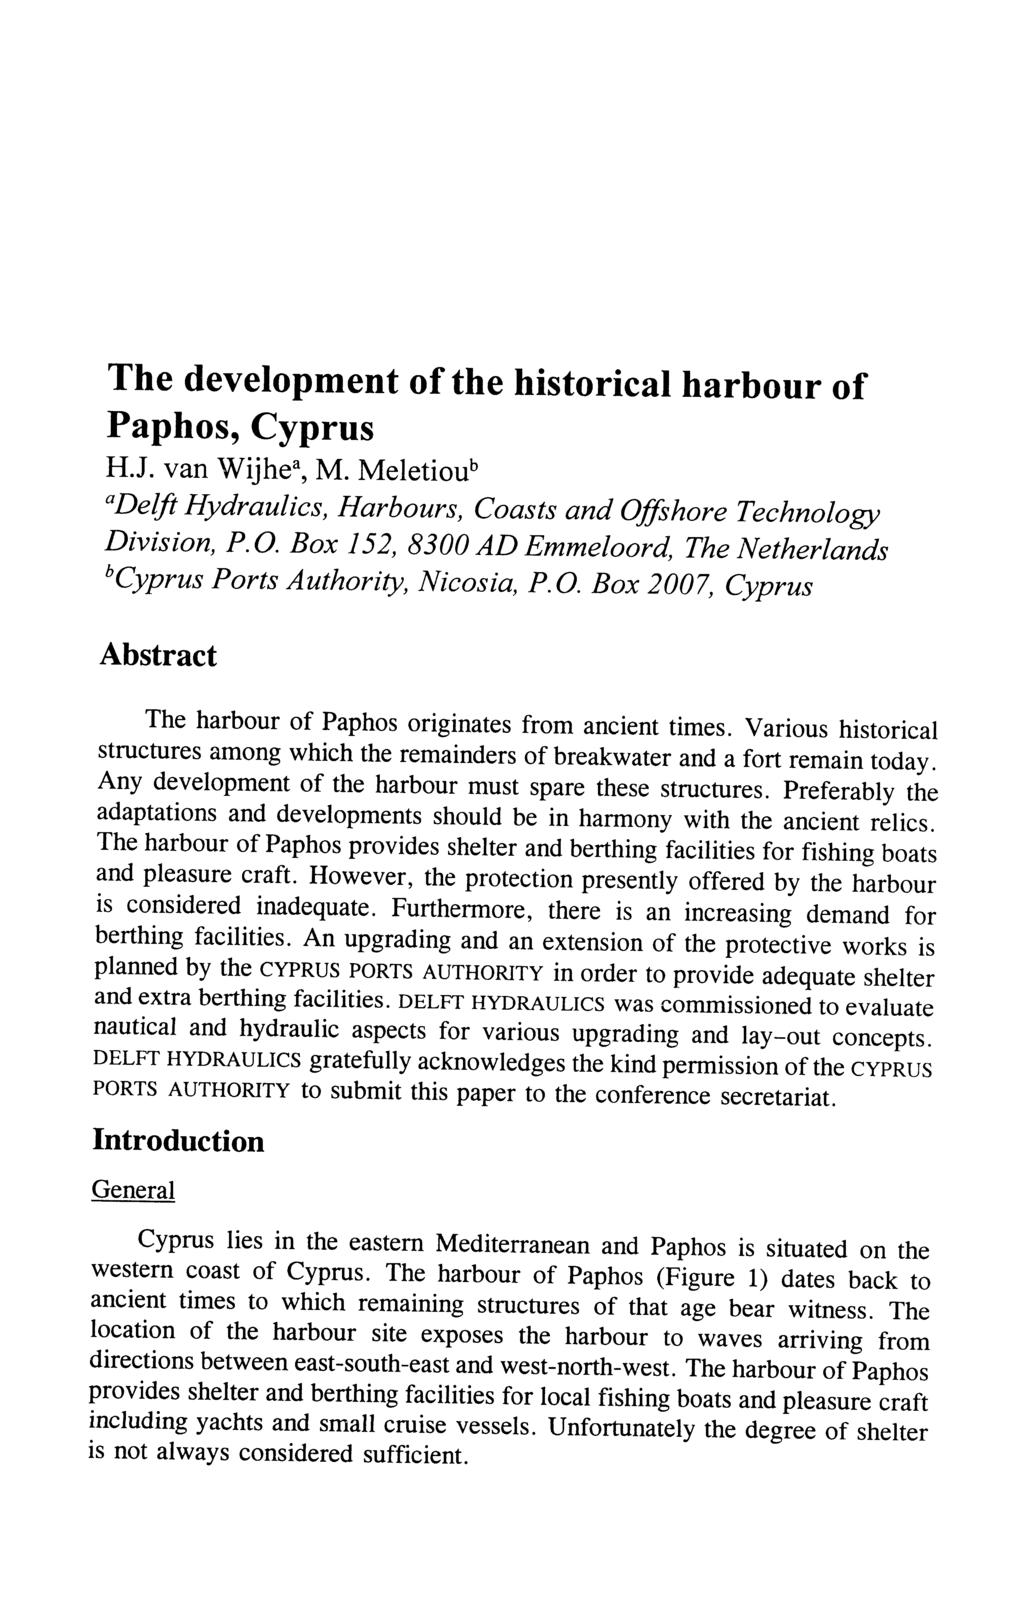 The development of the historical harbour of Paphos, Cyprus H.J. van Wijhe*, M. Meletiou^ Division, P.O.